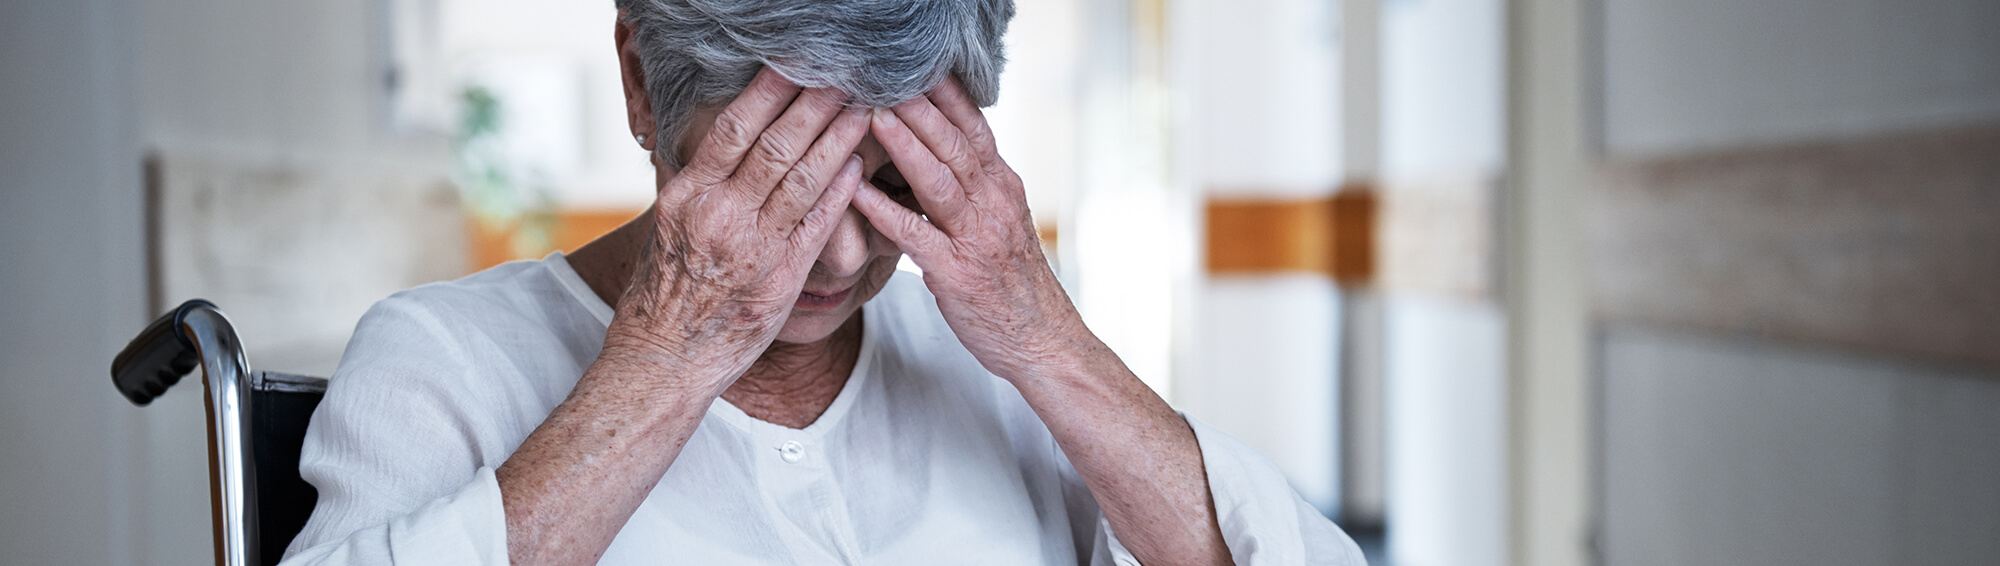 What Compensation is Available for Nursing Home Abuse Victims and Their Families?